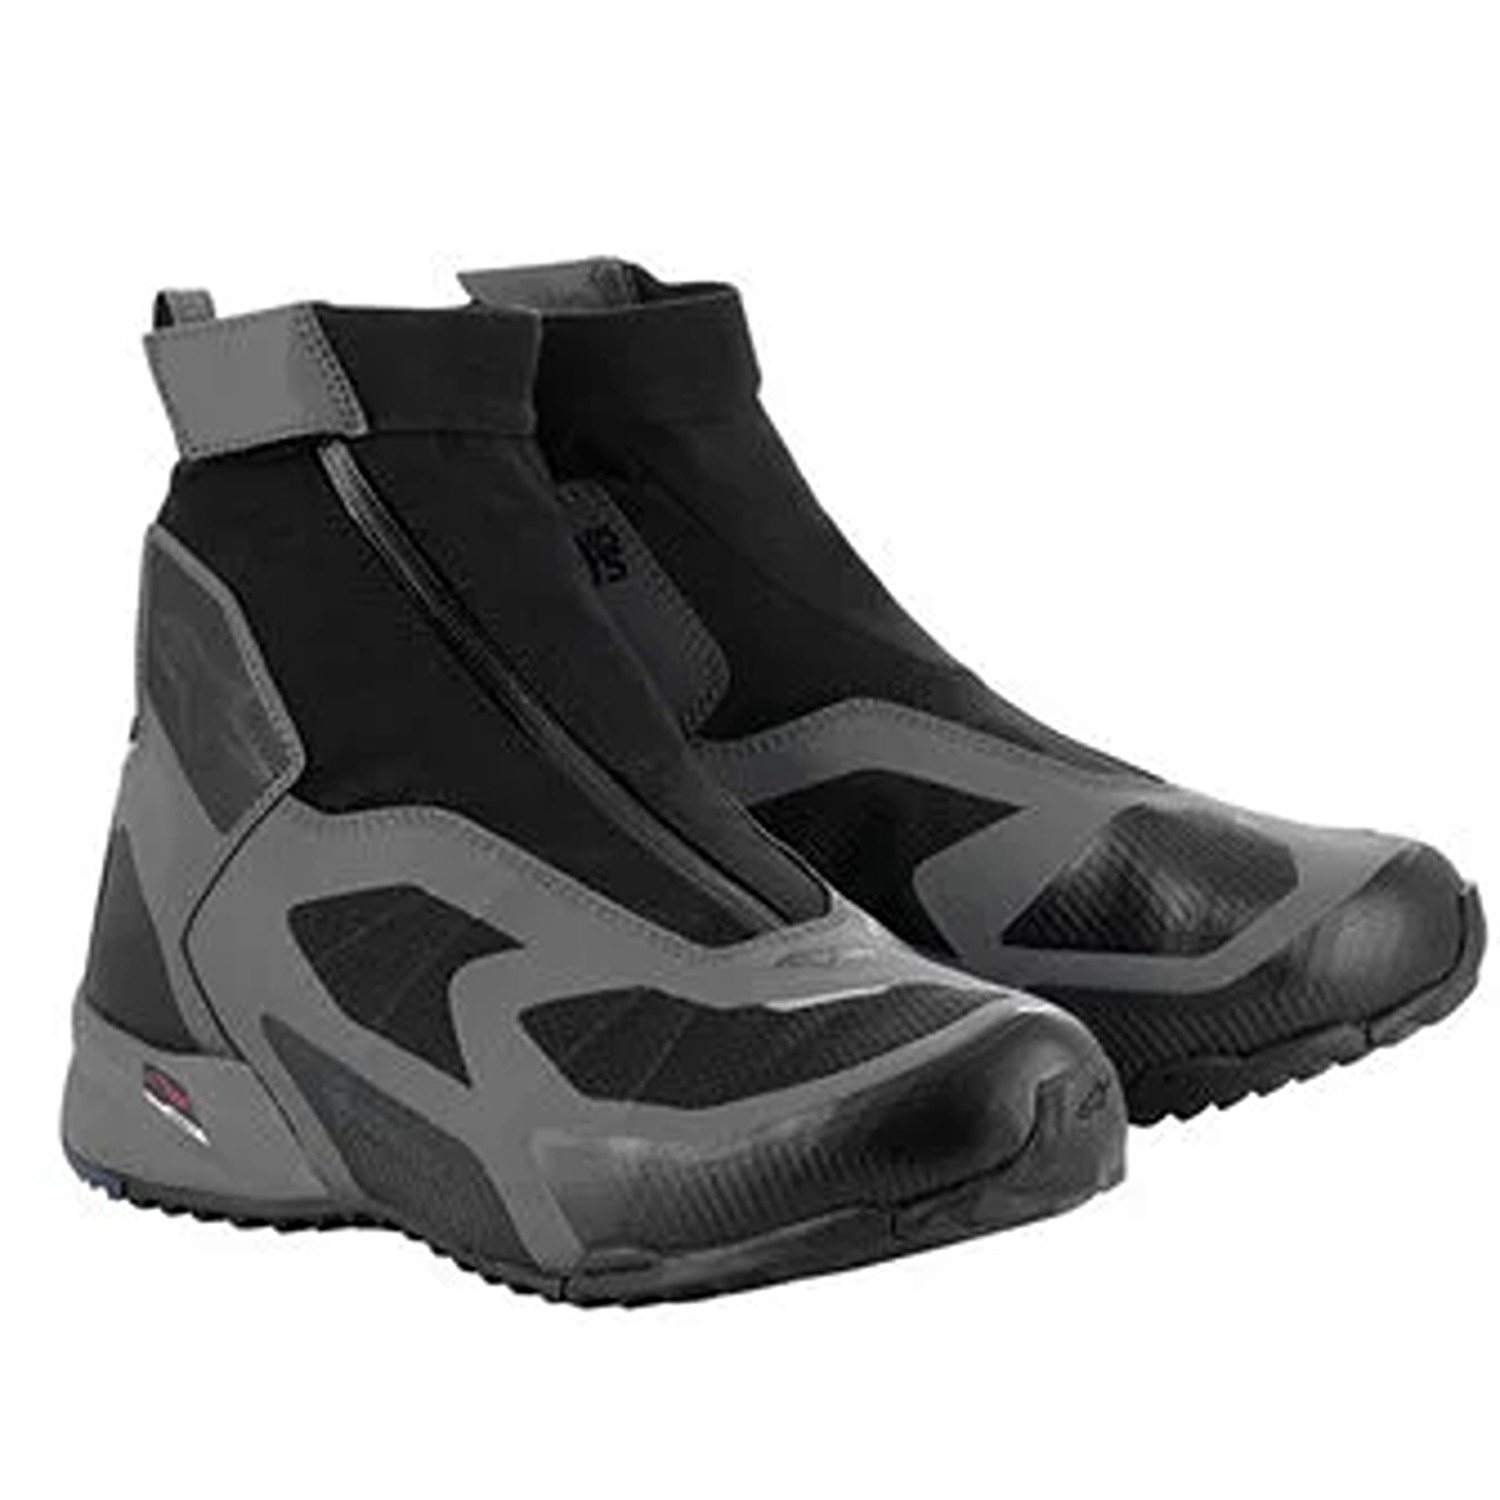 Image of Alpinestars CR-8 Gore-Tex Shoes Black Mid Gray Bright Red Size US 9 EN